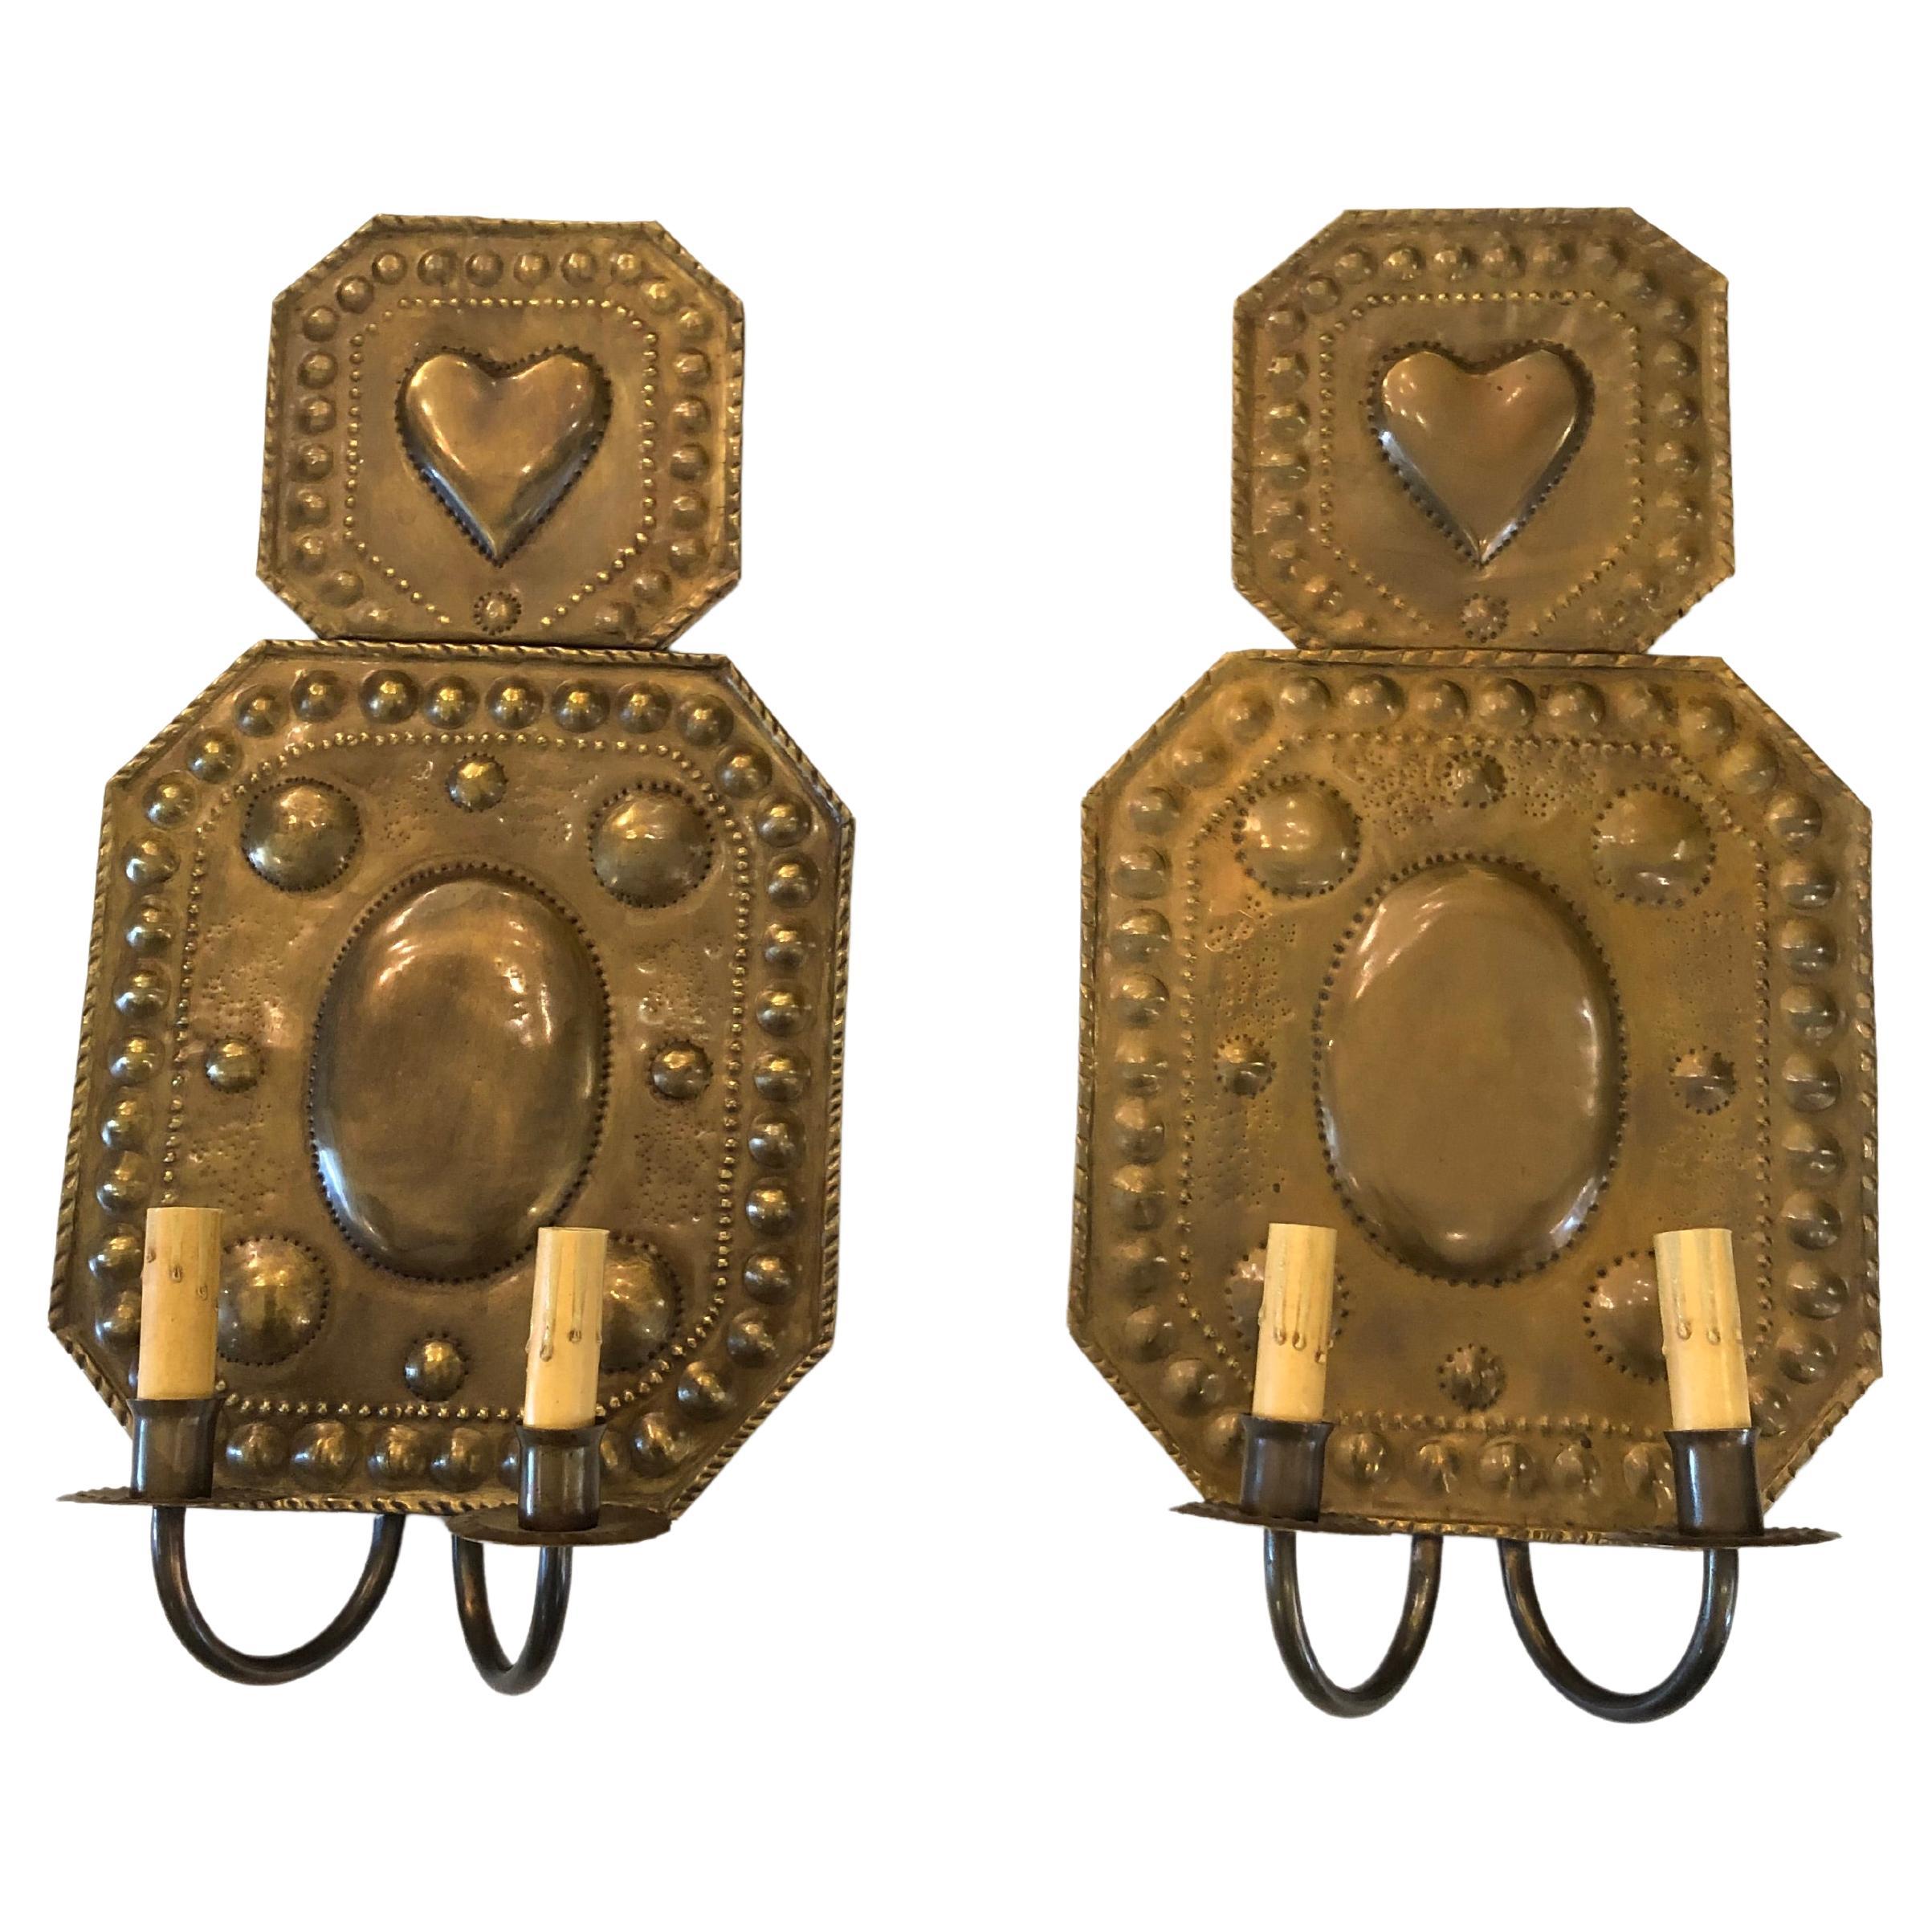 Early 19th Century American Hammered Brass Wall Sconces For Sale